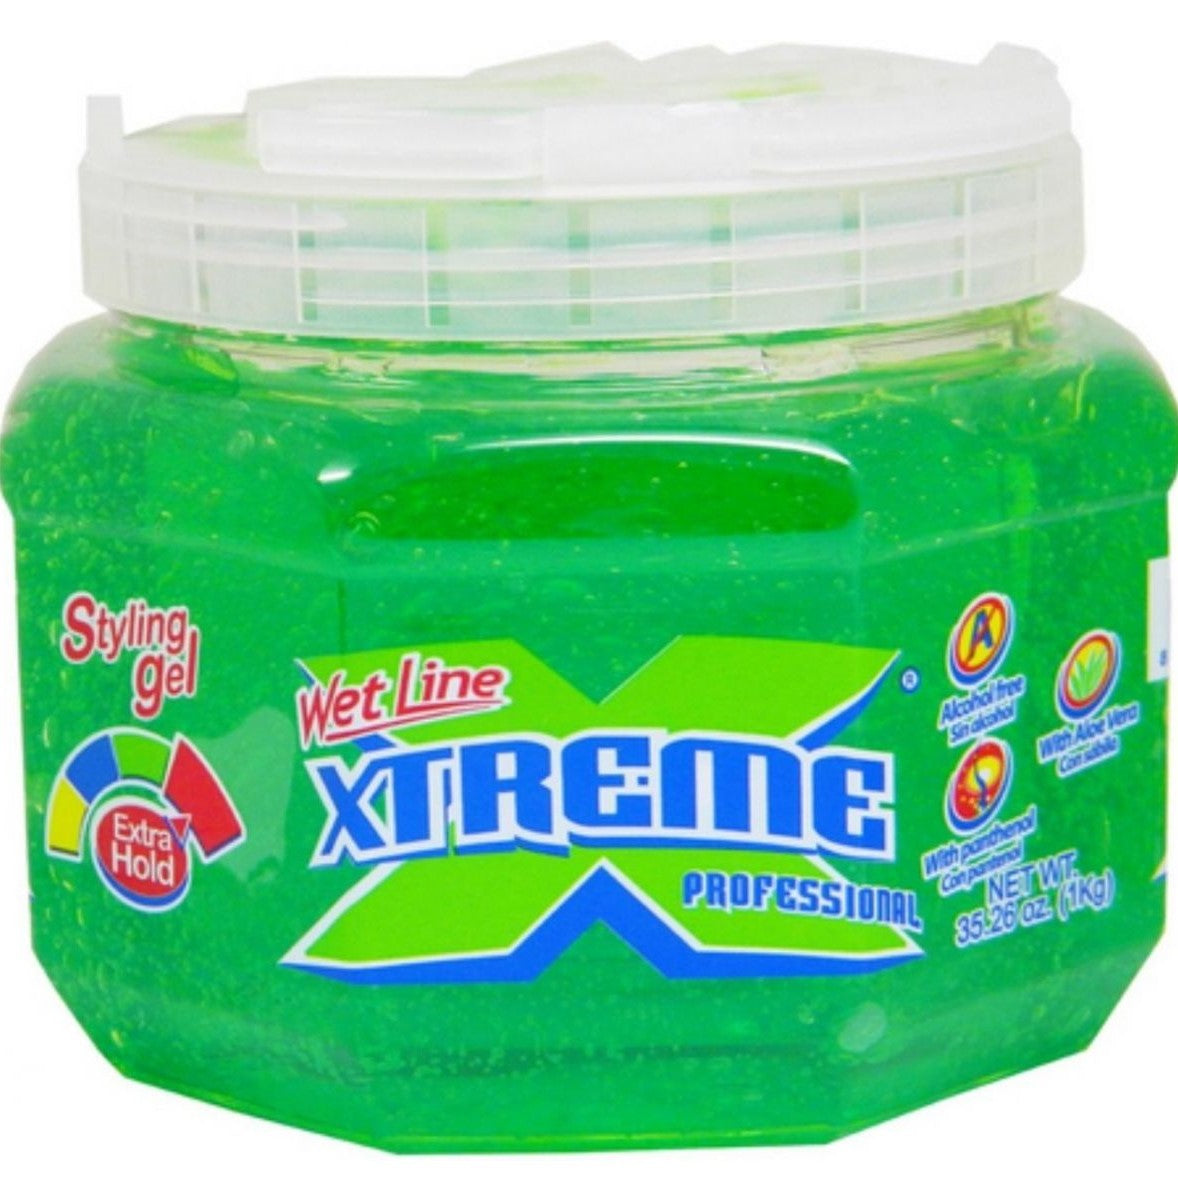 Wet Line Xtreme Professional Styling Gel Extra Hold Green, 35,6 Oz / 1 Kg 